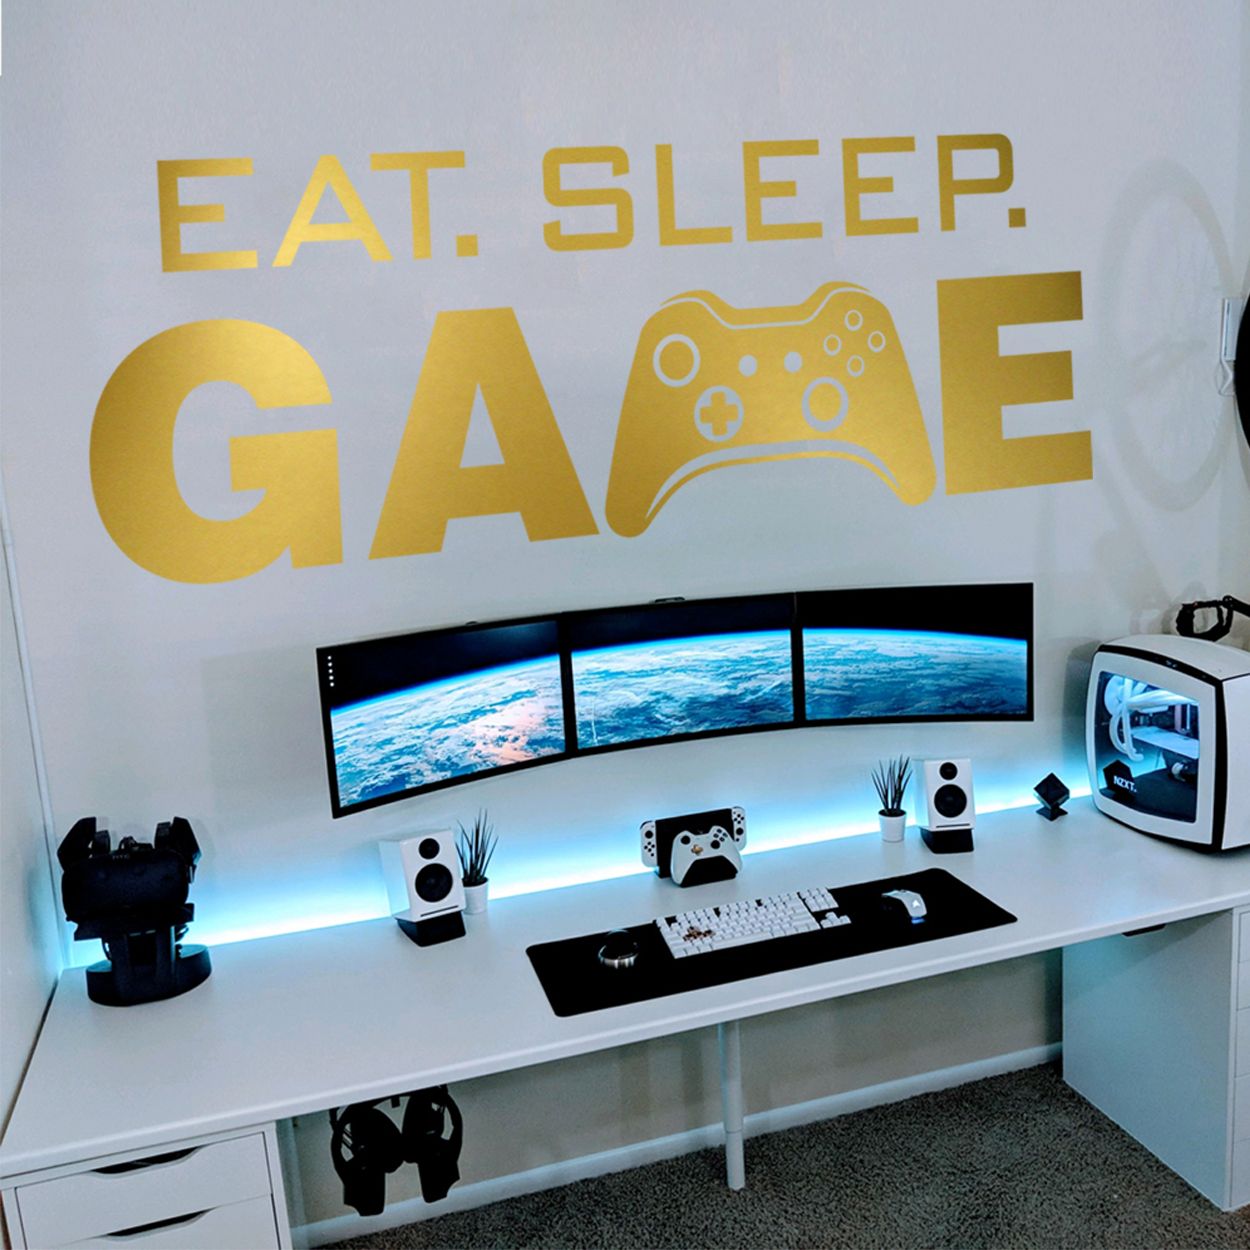 Eat sleep game stickers can be stuck to bedroom Wall LAP TOP BAG IPAD CAR 